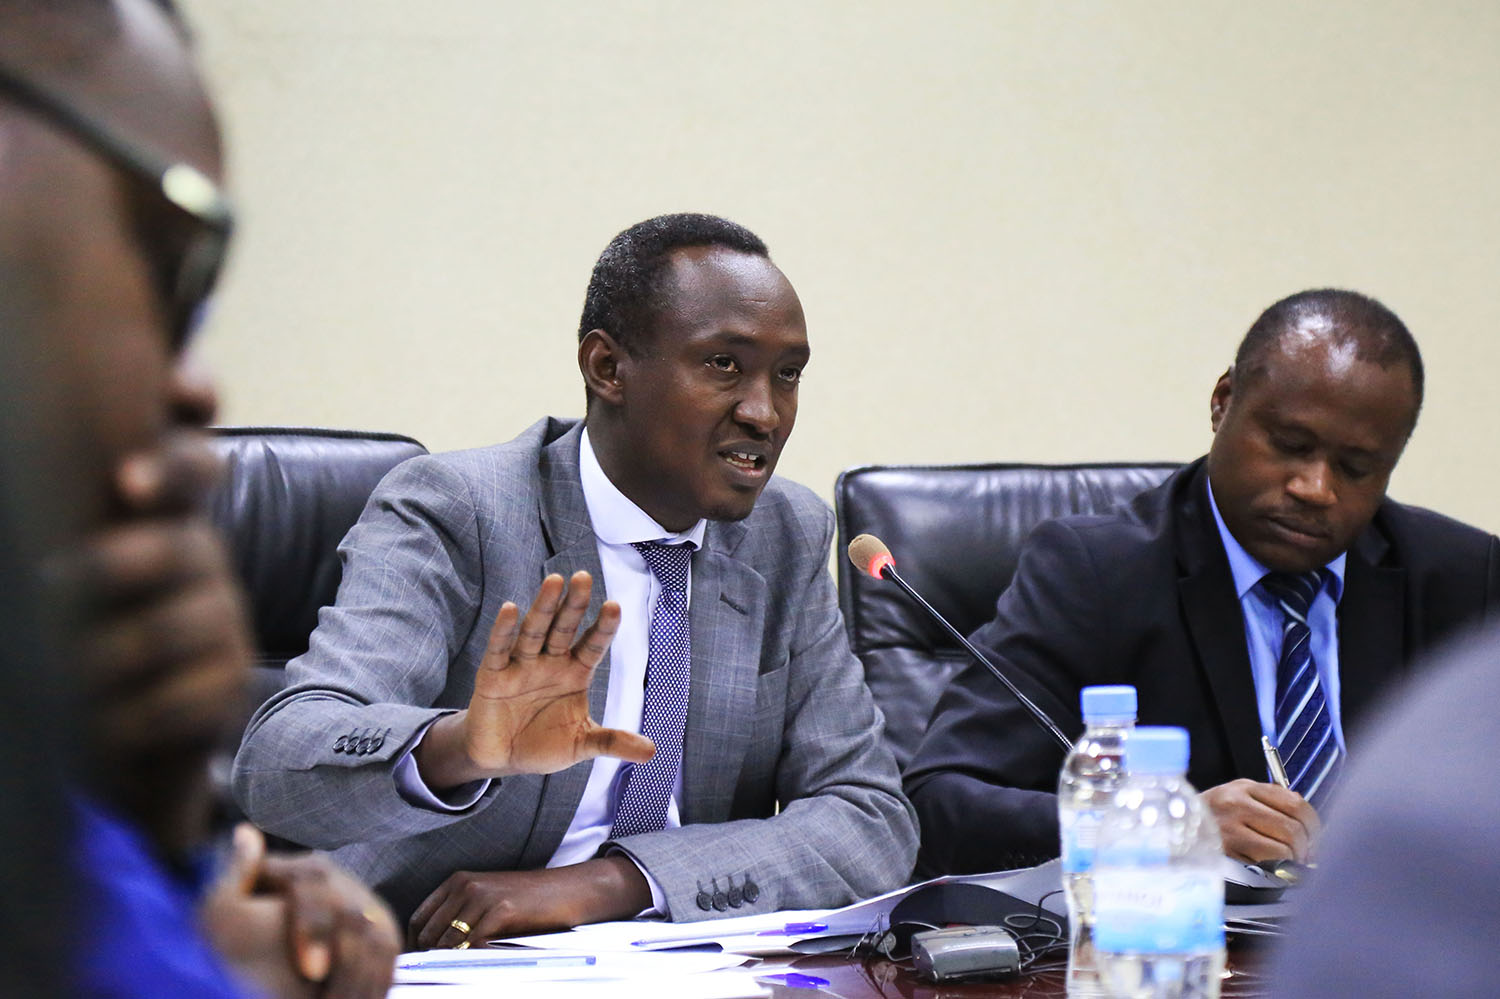 Ivan Murenzi, Deputy Director General of the National Institute of Statistics of Rwanda (left), gestures during a news briefing as Minister for Finance and Economic Planning, Uzziel Ndagijimana, takes notes in Kigali yesterday. Sam Ngendahimana.